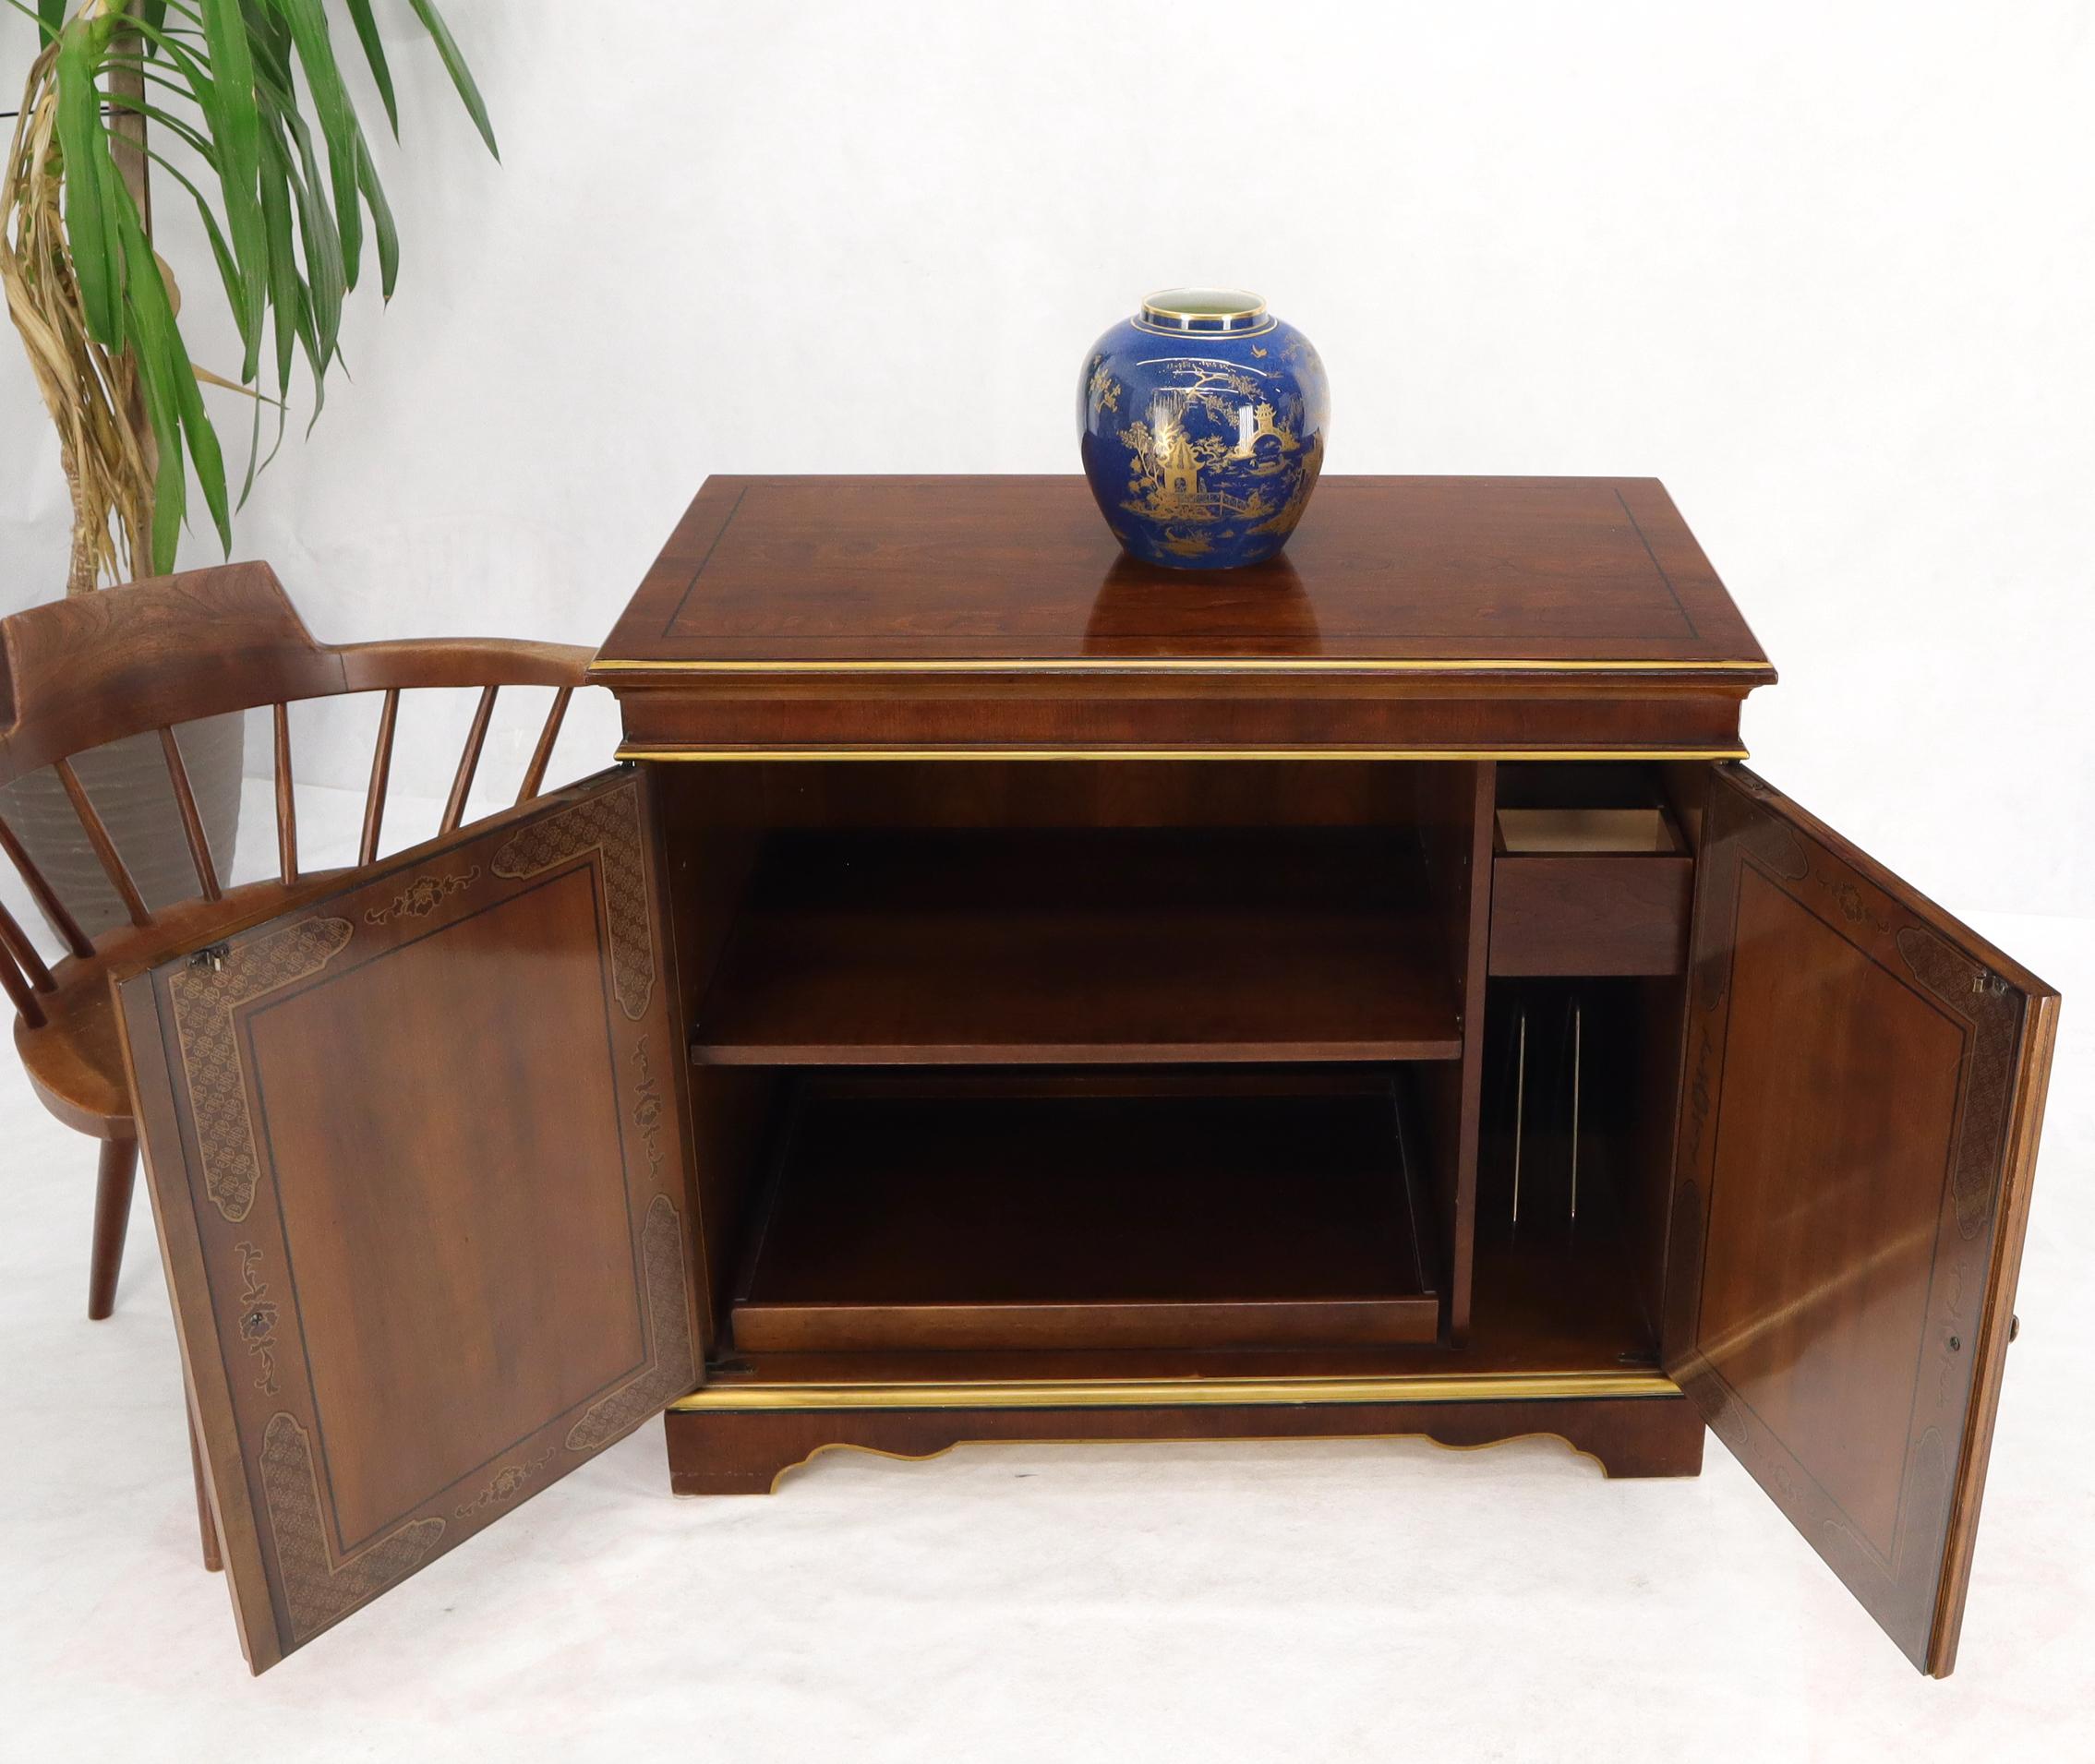 Double door chinoiserie style small credenza server cabinet by Drexel Heritage.